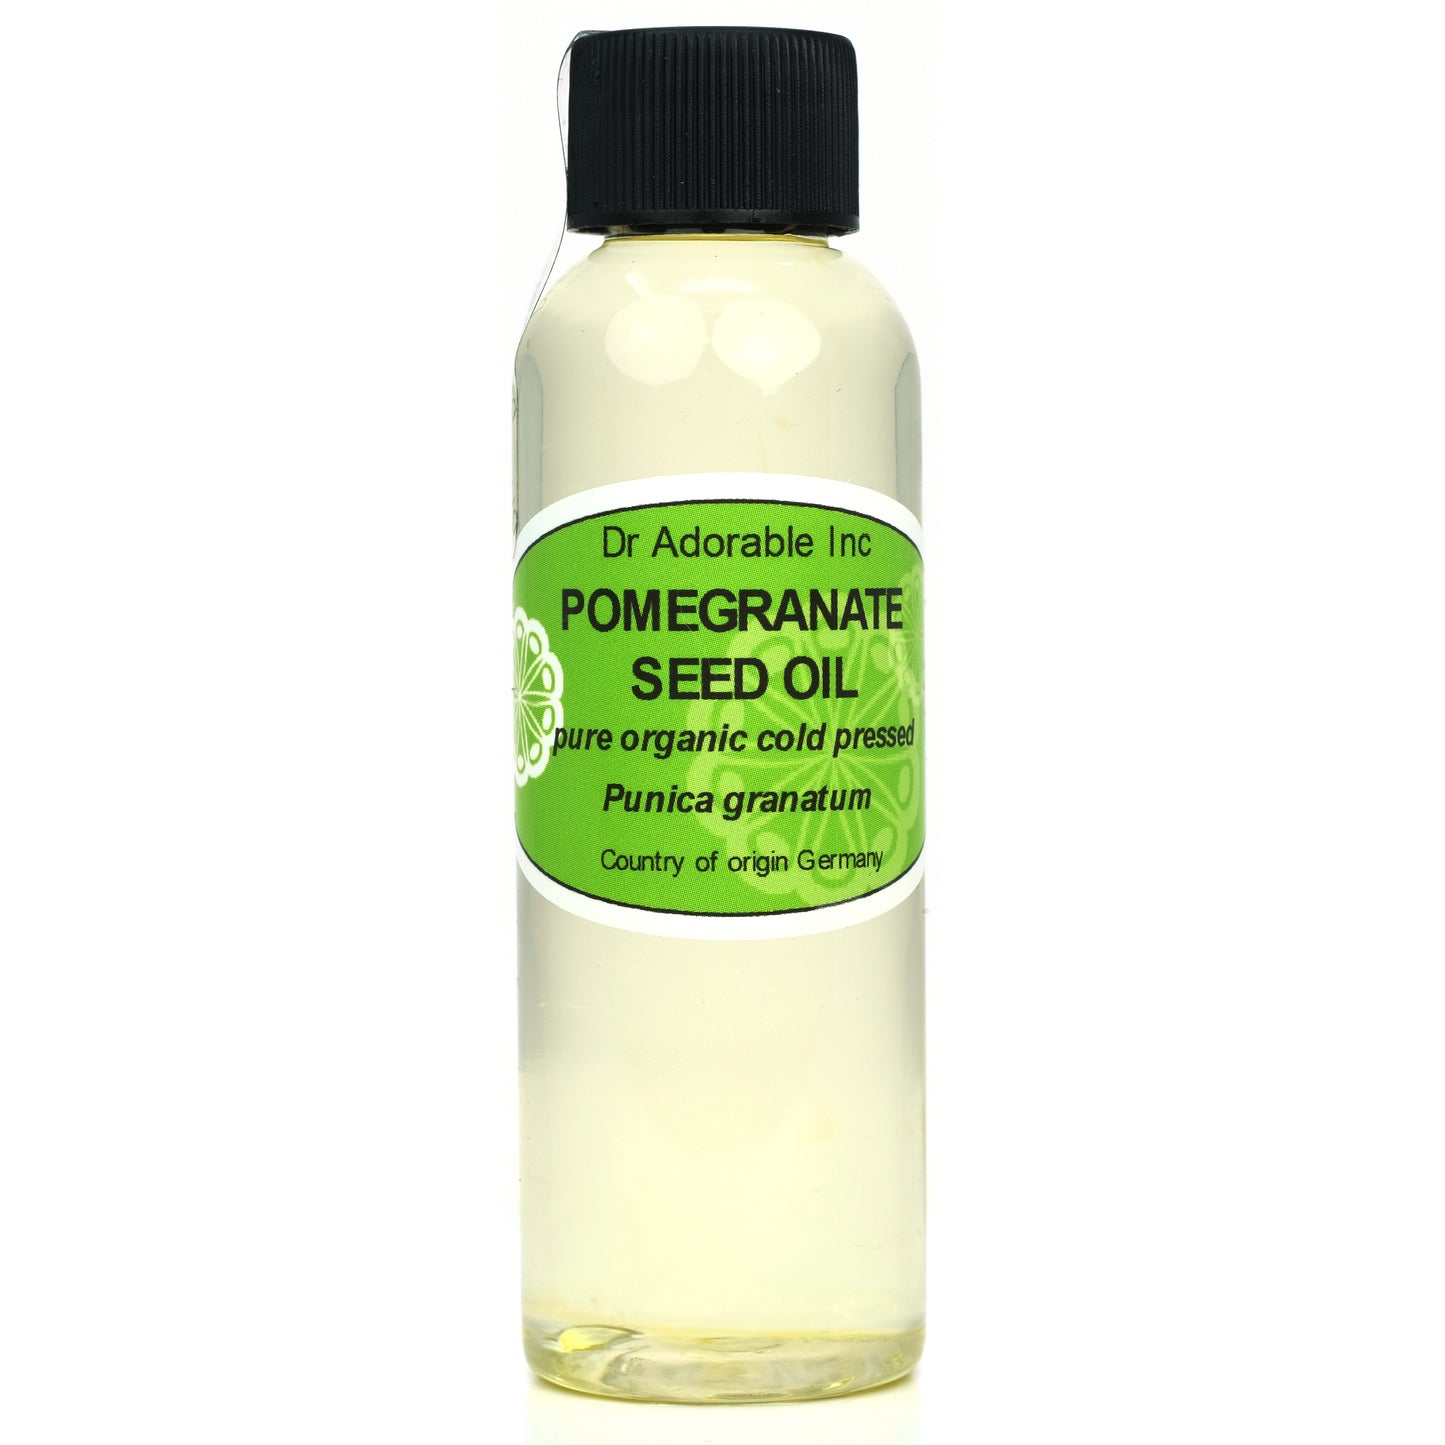 Pomegranate Seed Oil - 100% Pure Natural Organic Cold Pressed